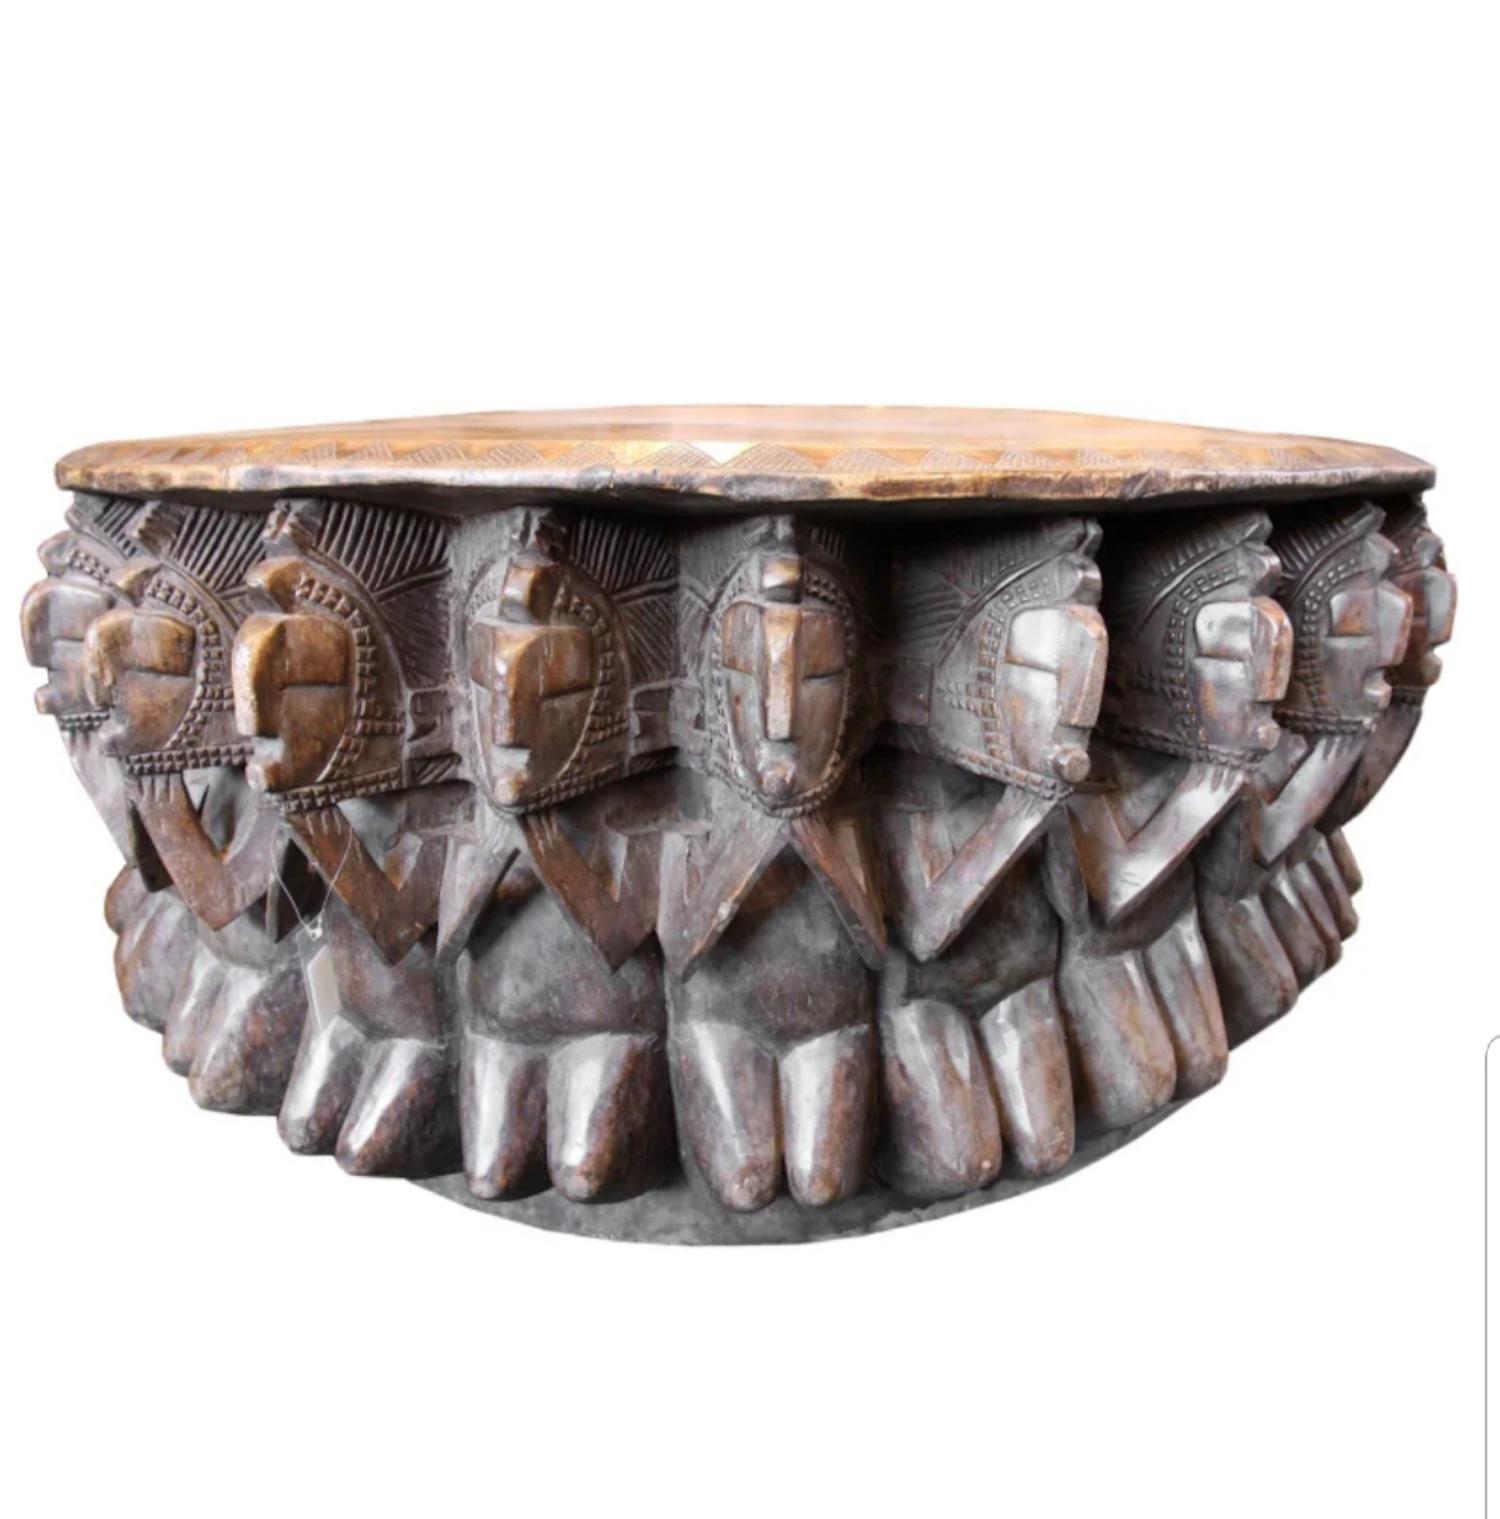 Chief's stool from the Baga people of Guinea-Conakry - Tribal Sculpture by Unknown